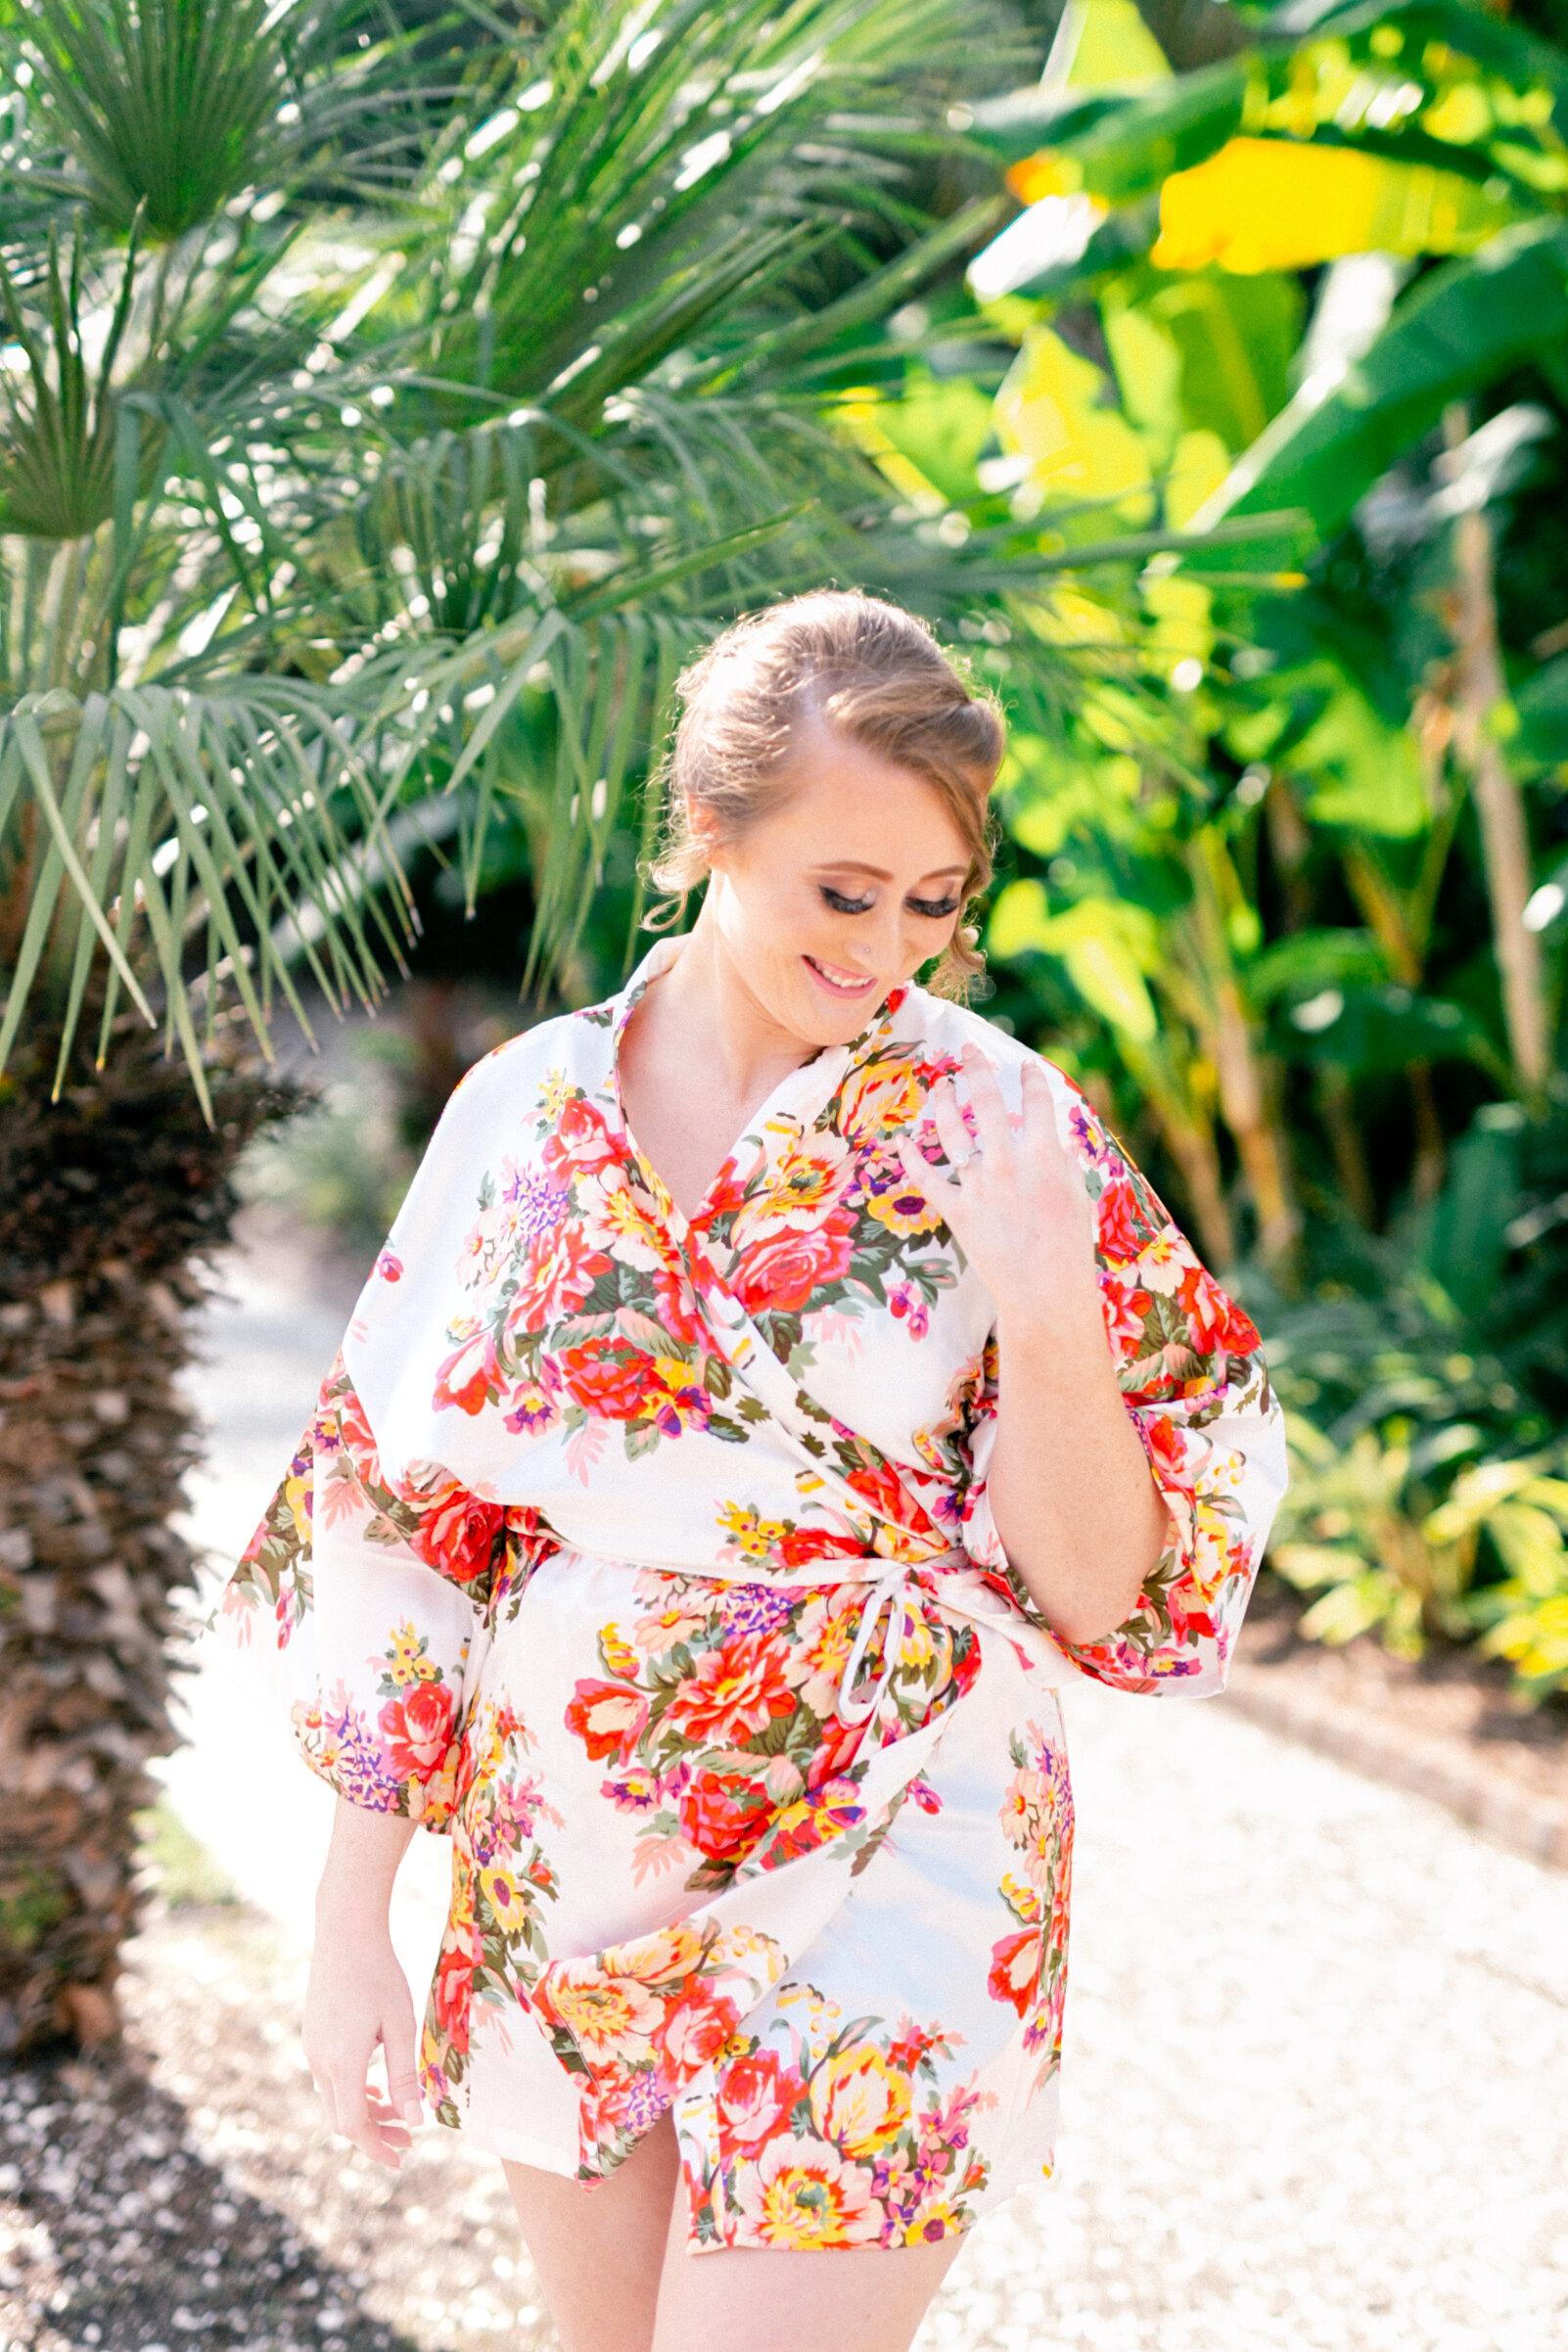 Stunning bride-to-be in Charleston, South Carolina getting ready for her seaside wedding.